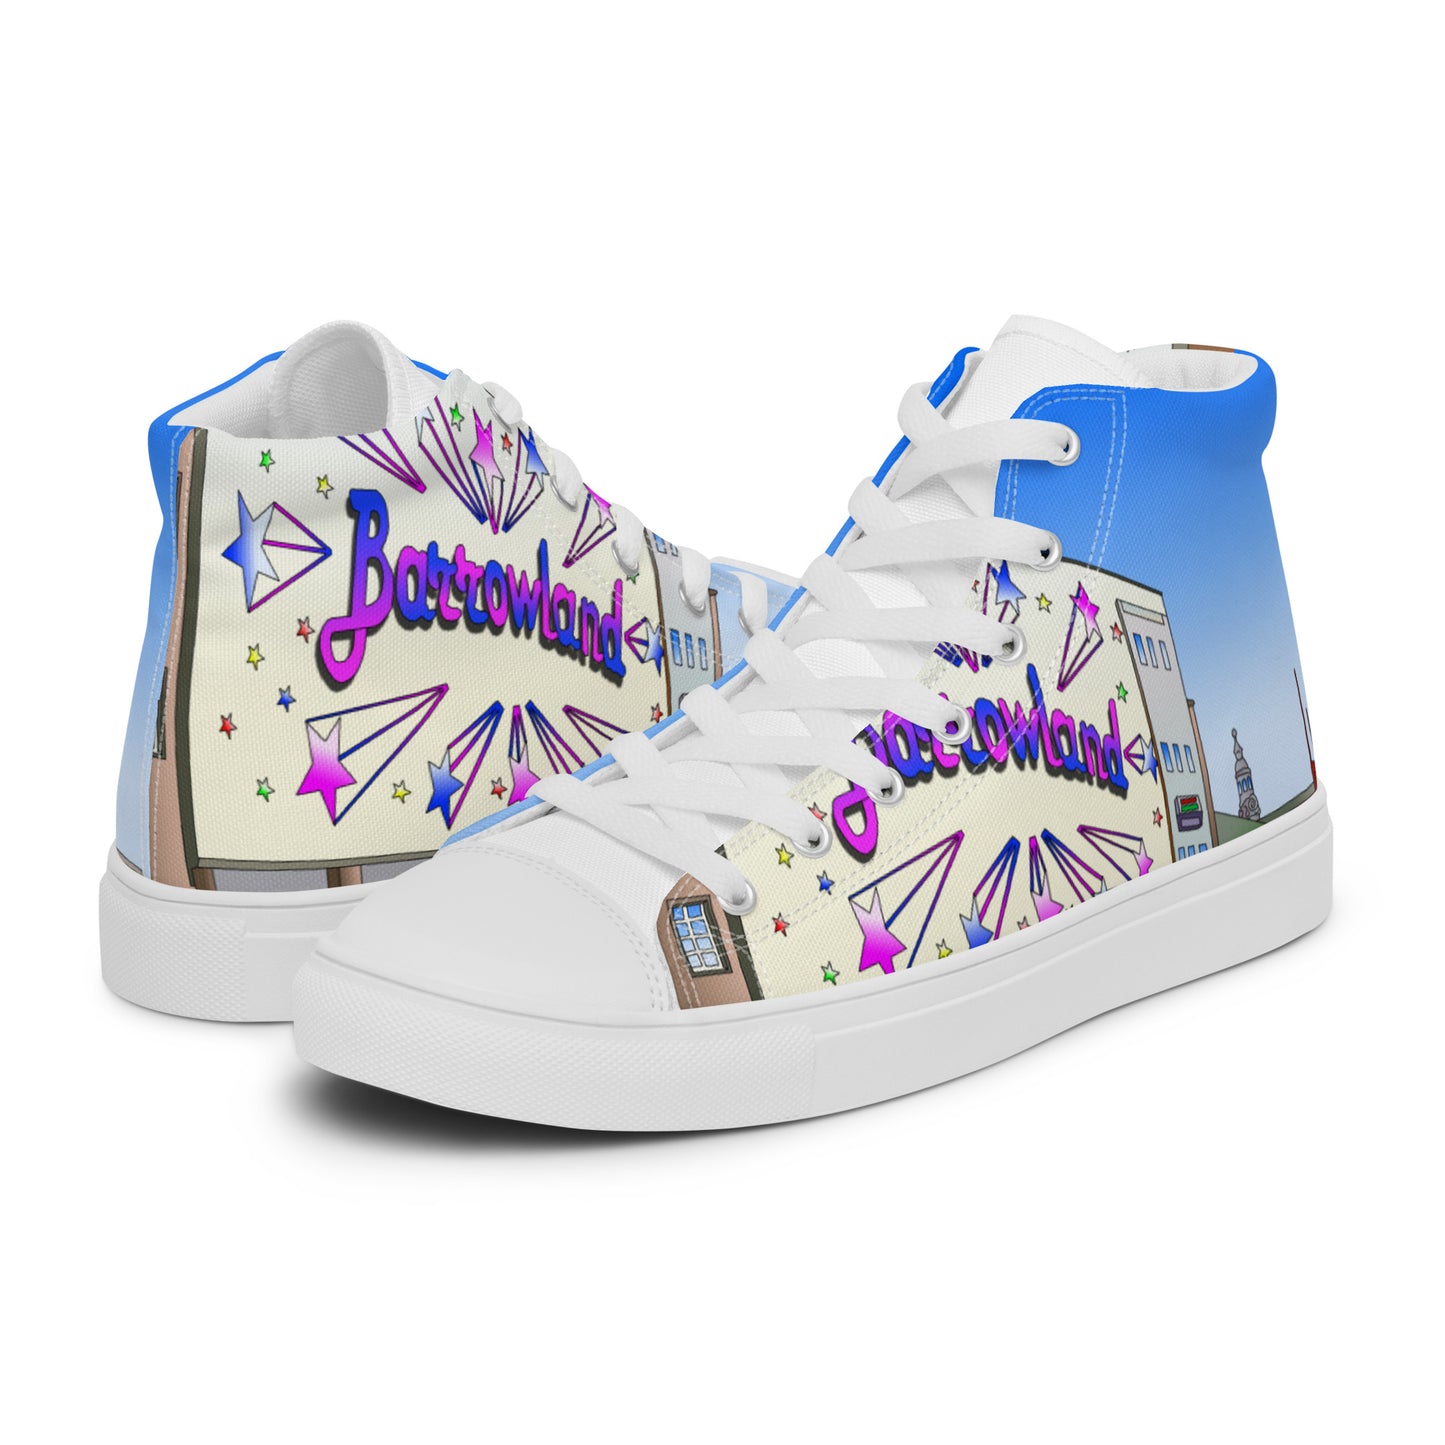 The Barrowlands Glasgow Women’s high top canvas shoes